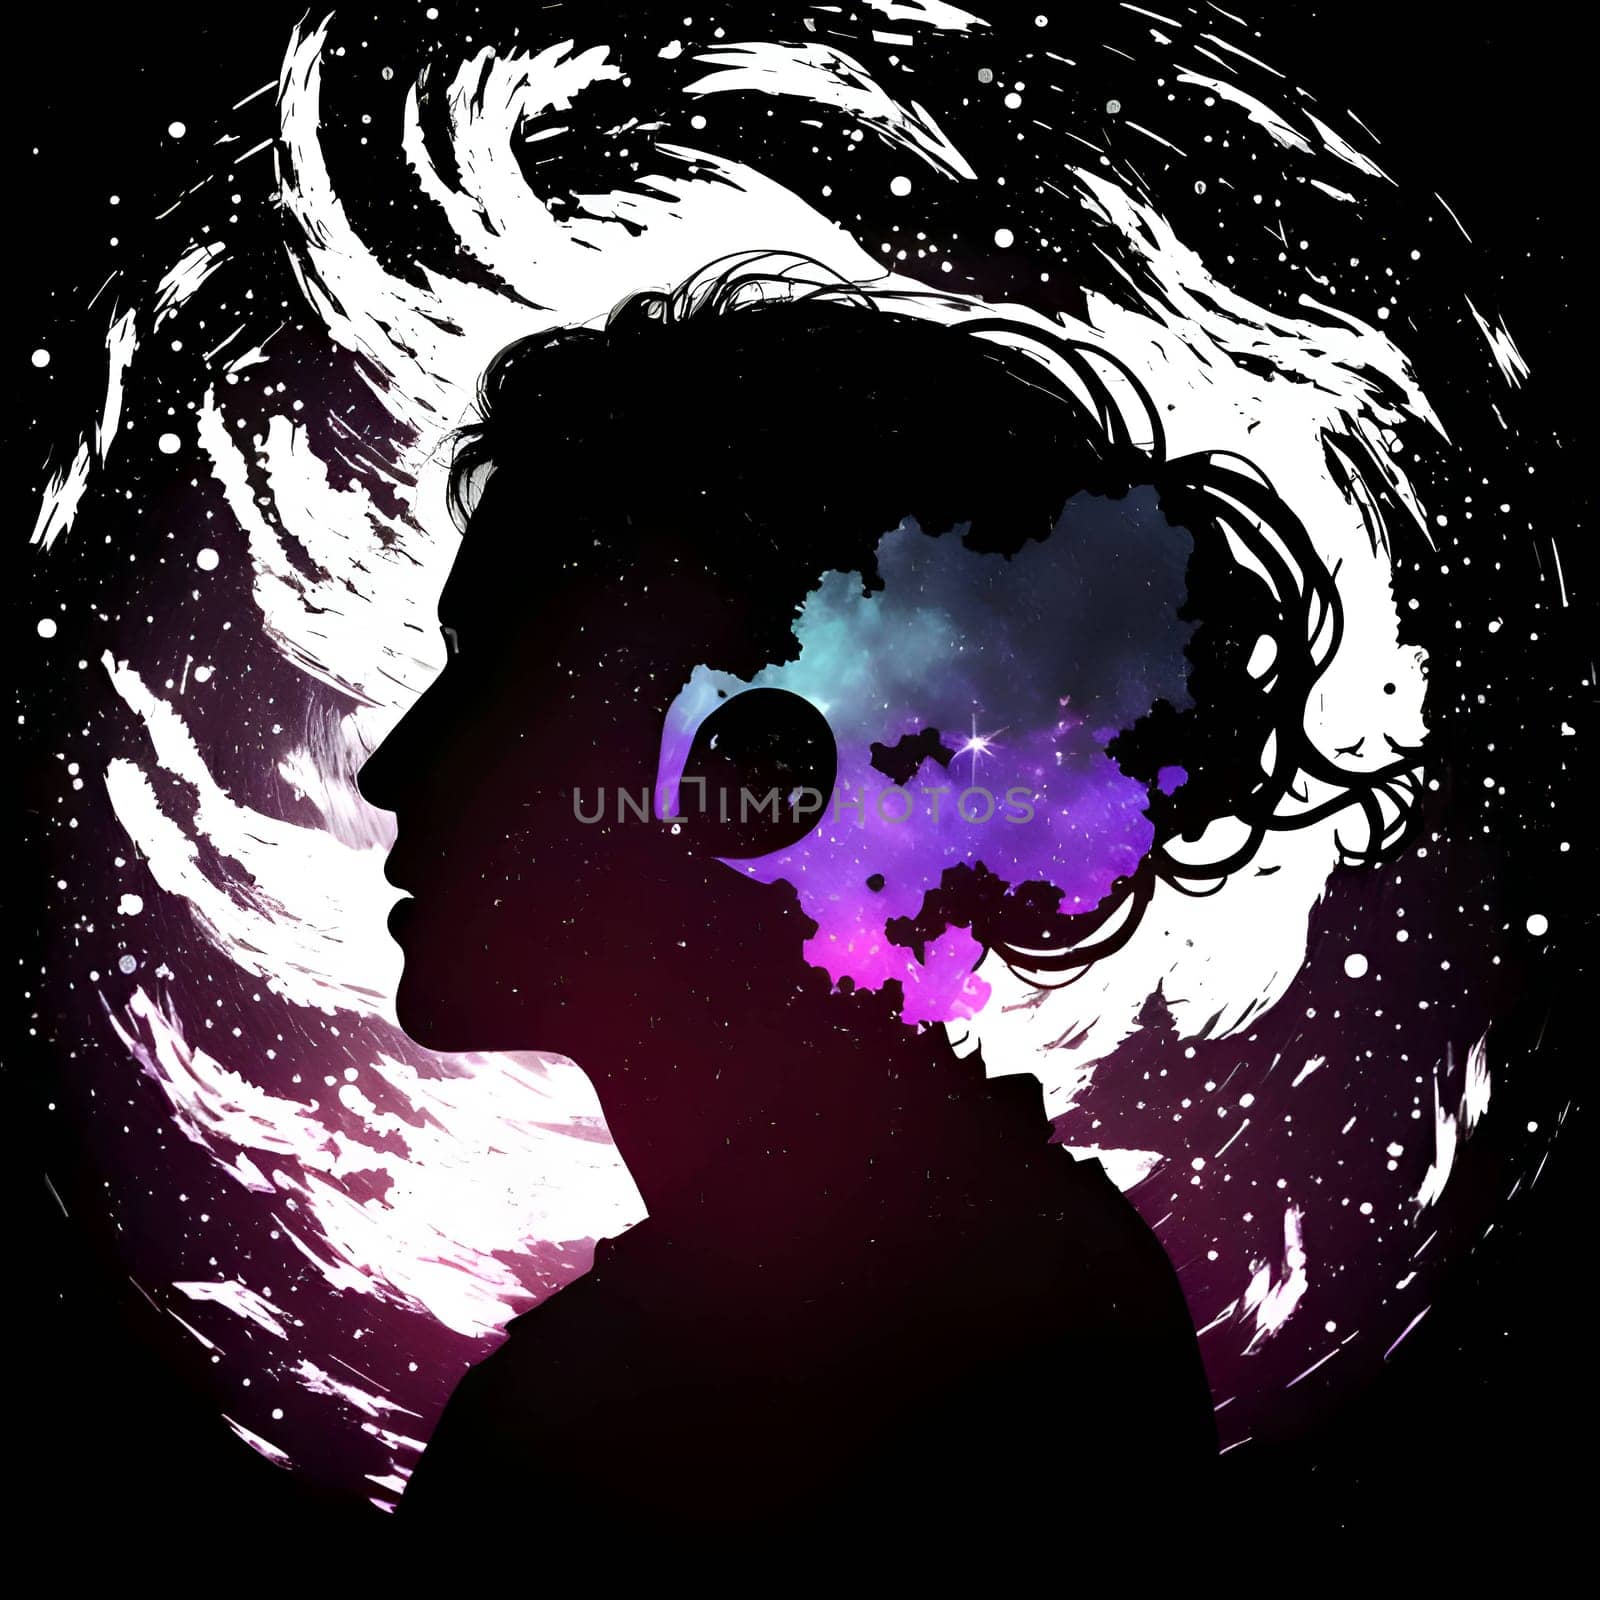 Vector illustration of a abstract person in black silhouette against a clean white background, capturing graceful forms.